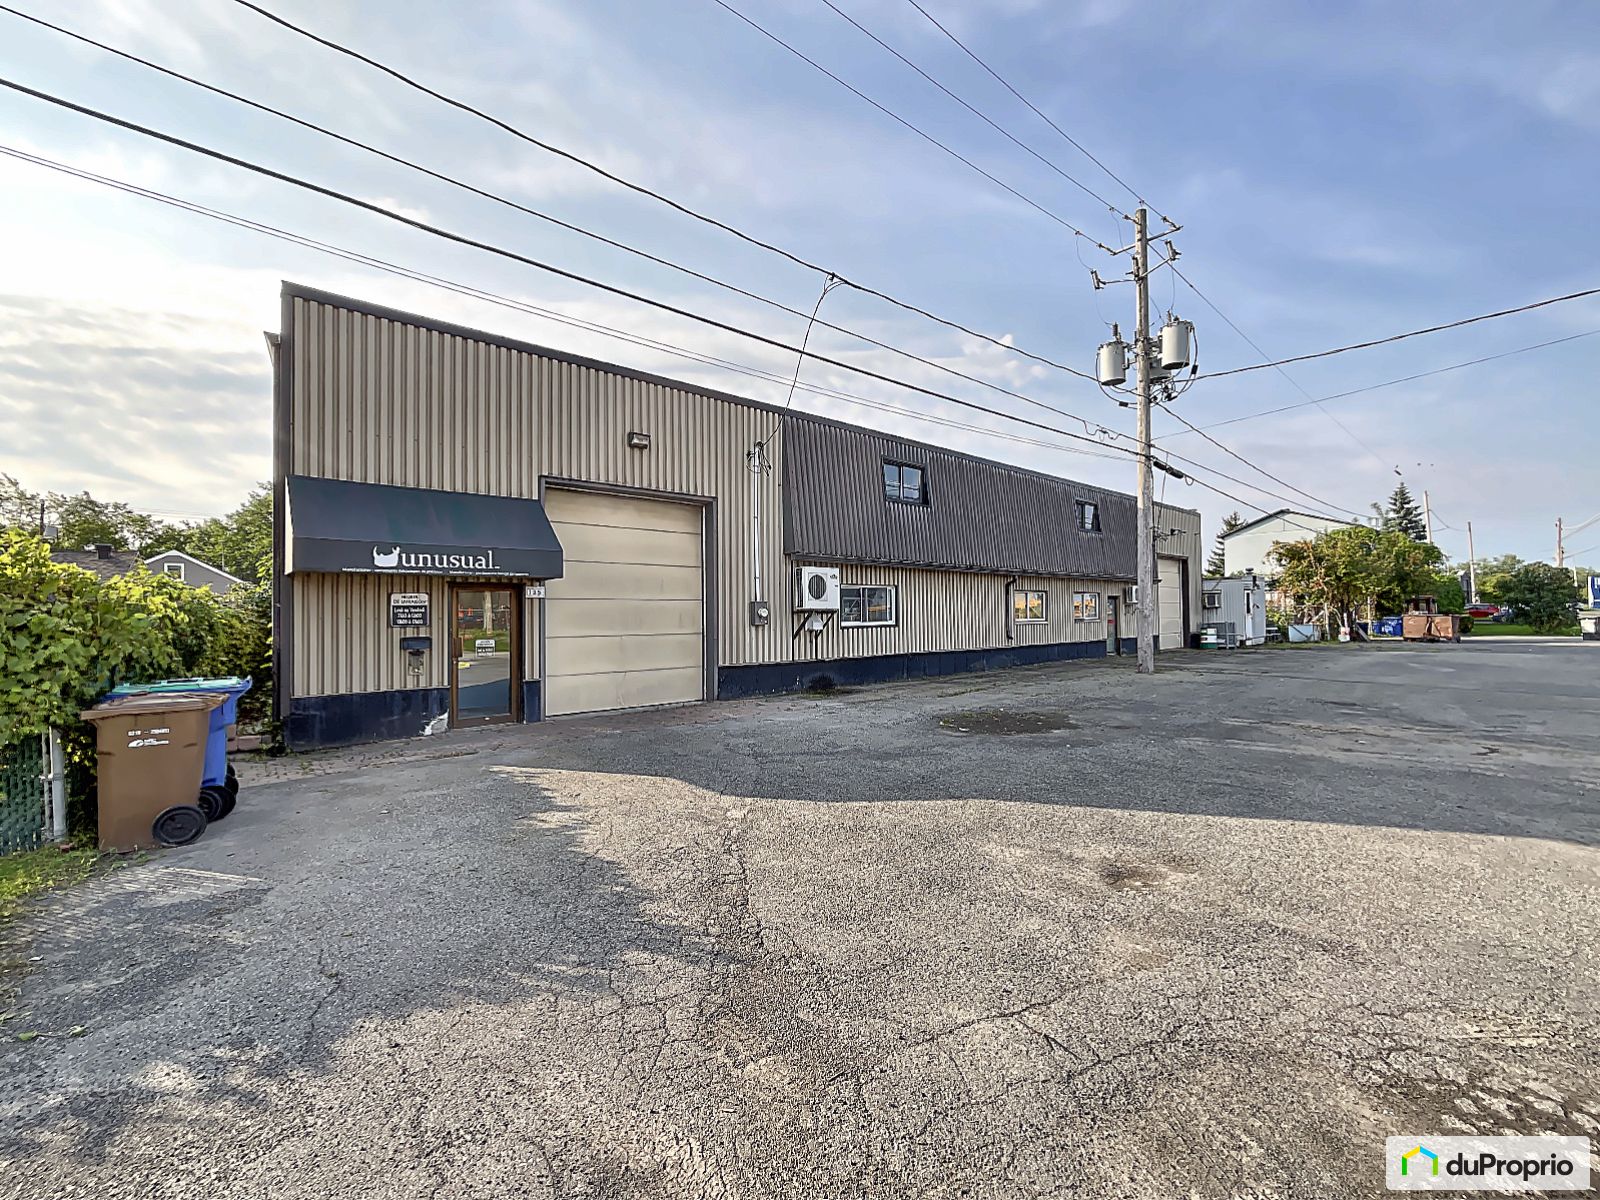 Industrial building for sale Salaberry-De-Valleyfield